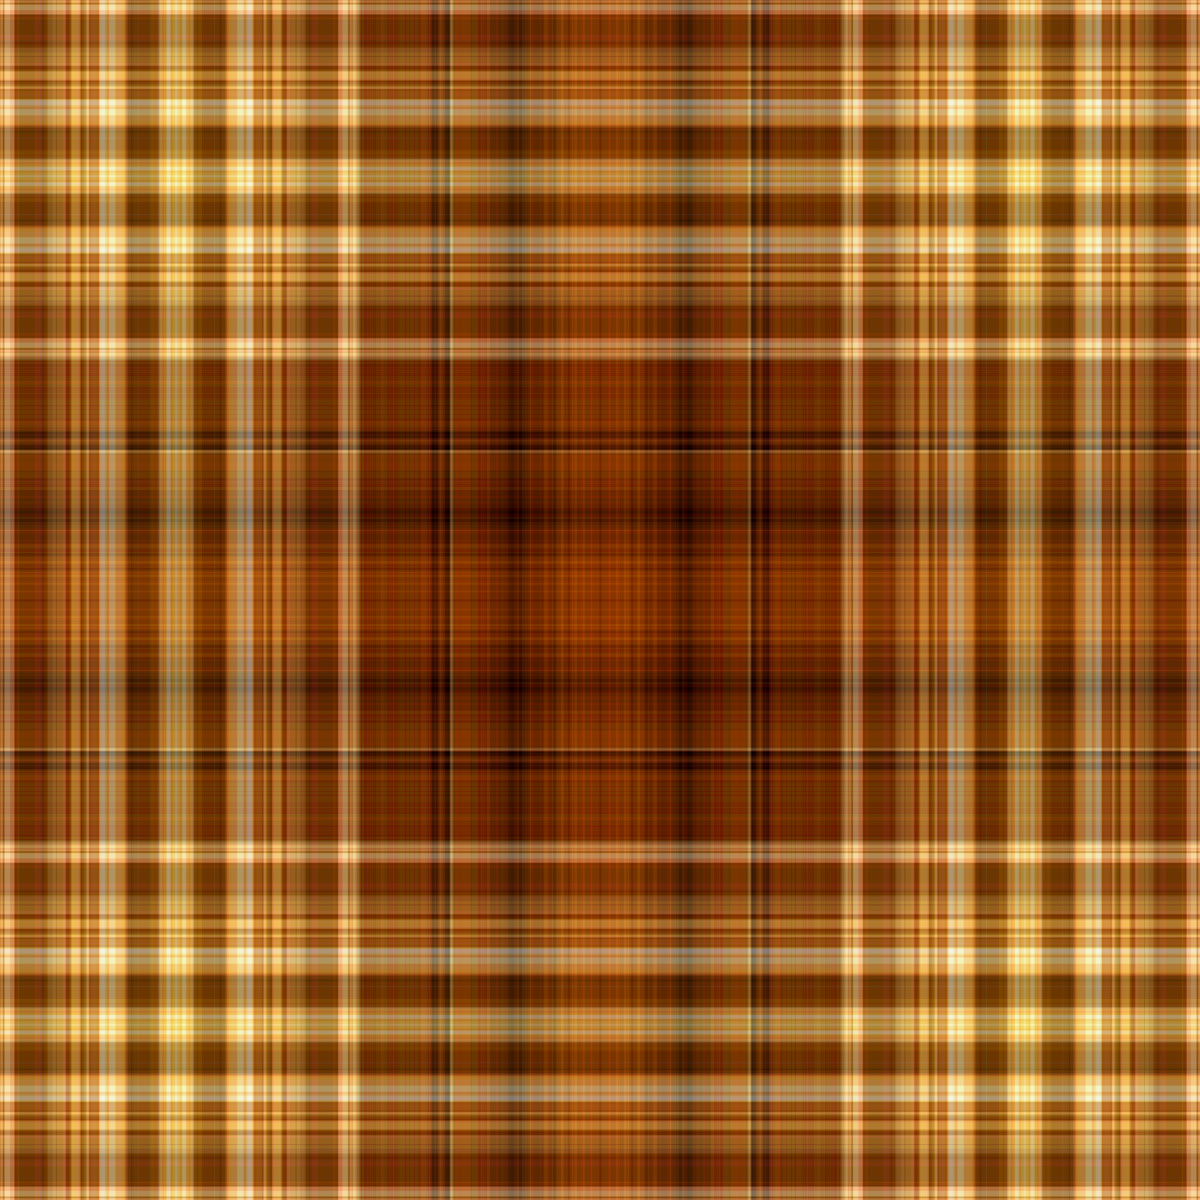 Schotten muster background texture, free picture